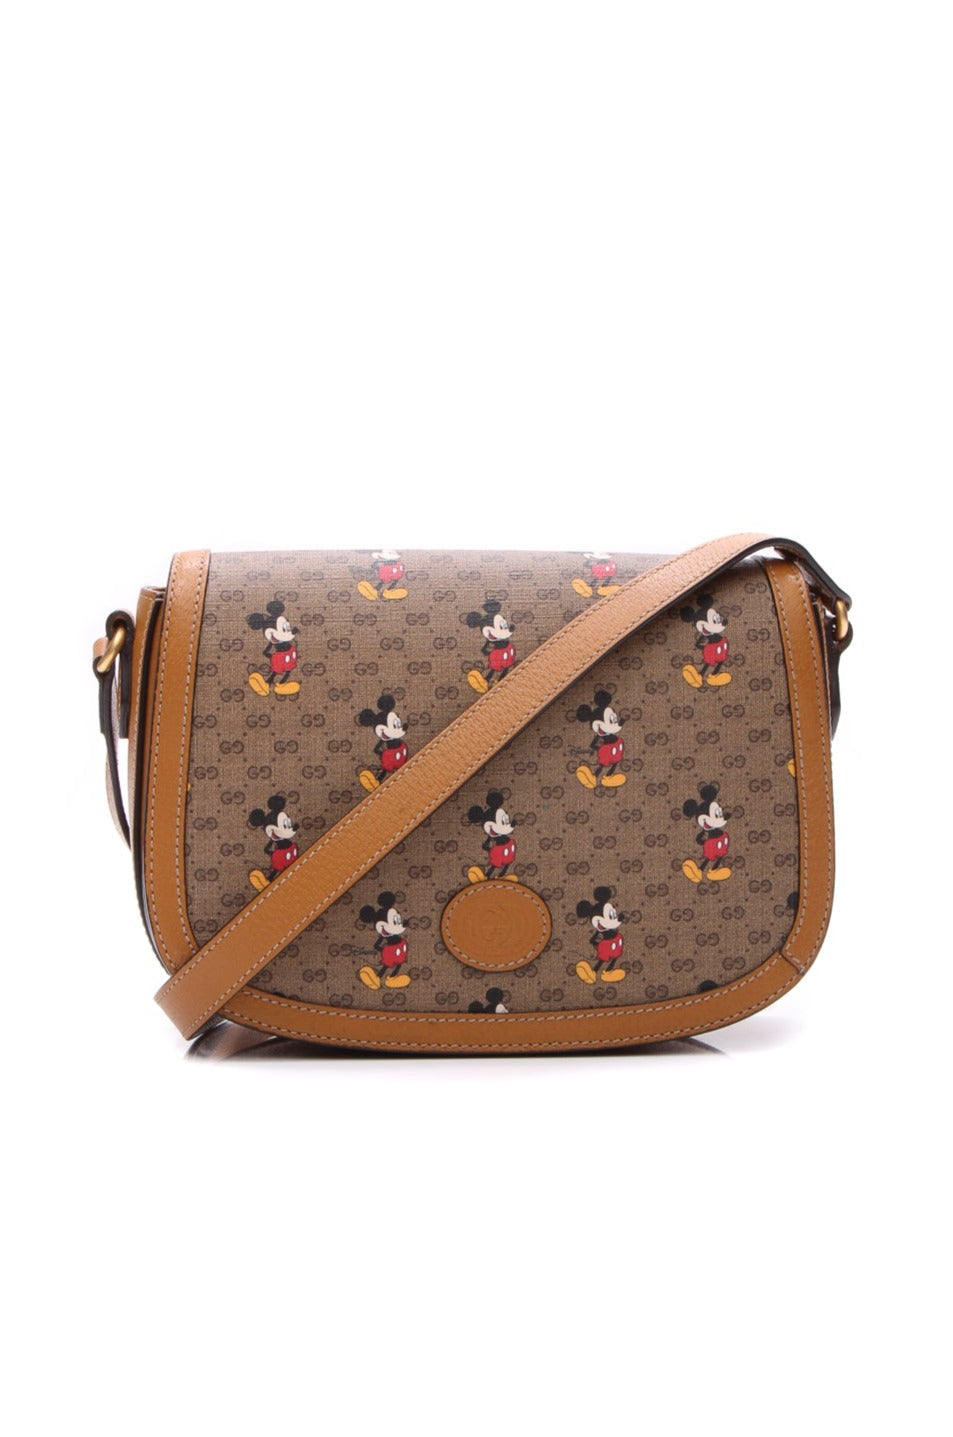 Gucci xDisney Mickey Mouse Flap Messenger Bag - Supreme - Couture USA